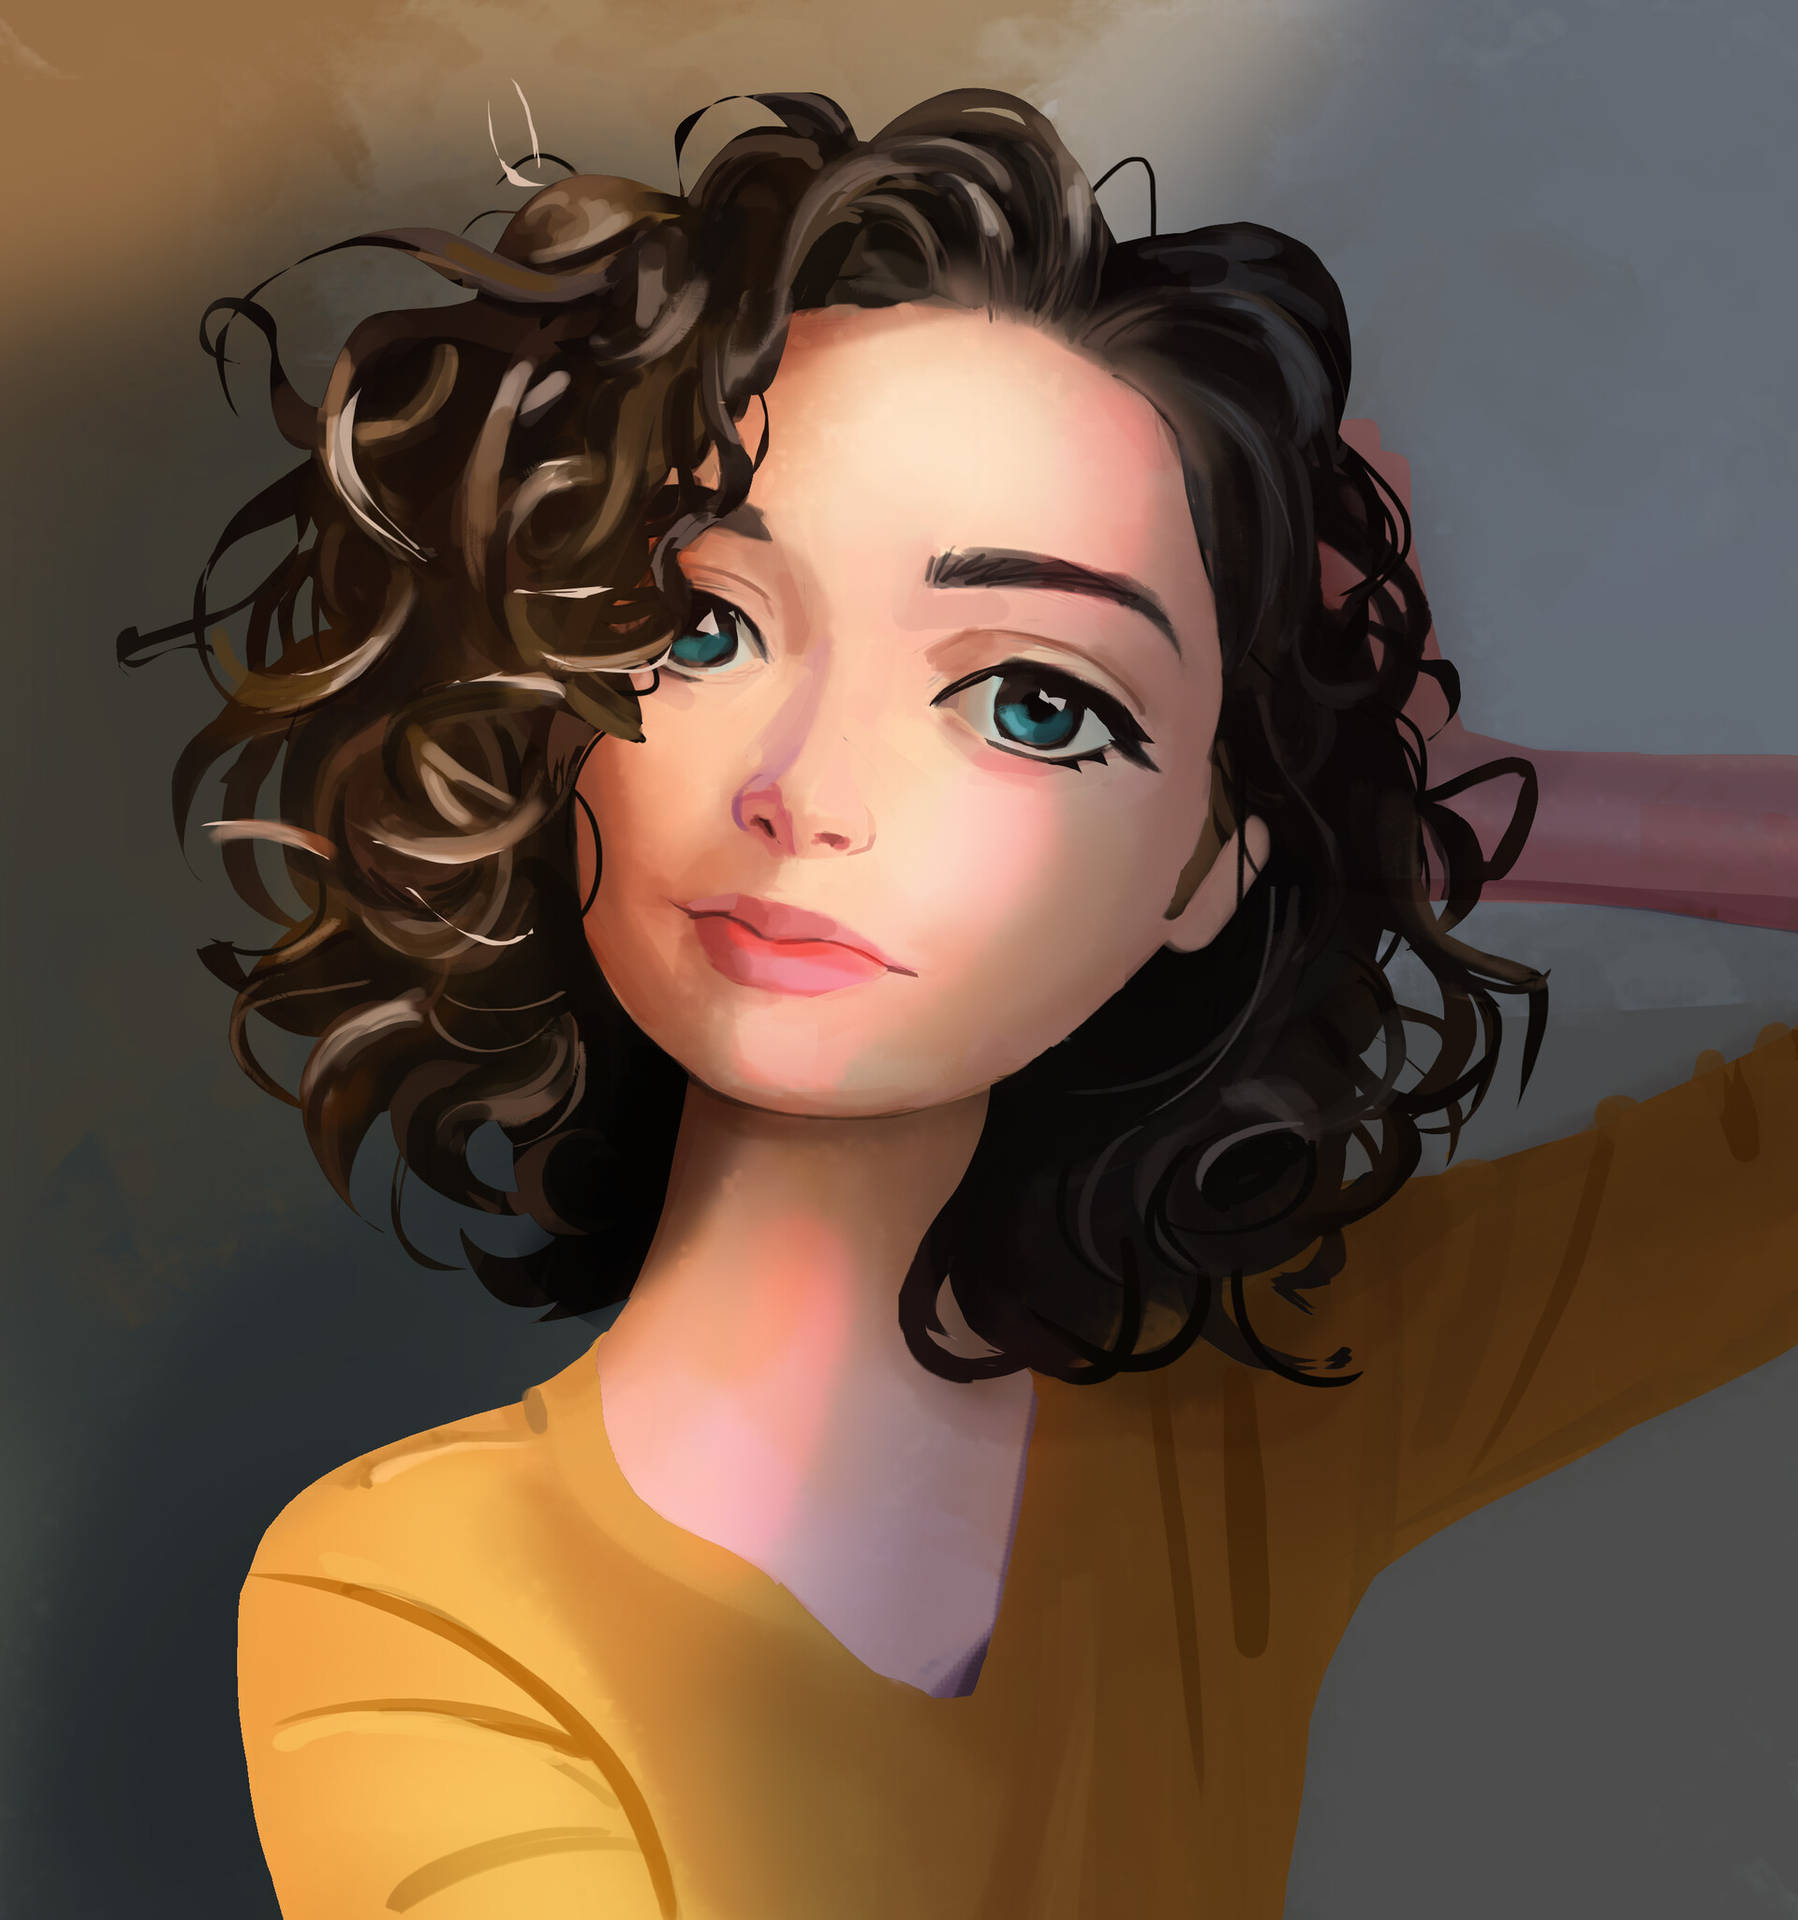 Download Realistic 3d Woman With Curly Hair Wallpaper 